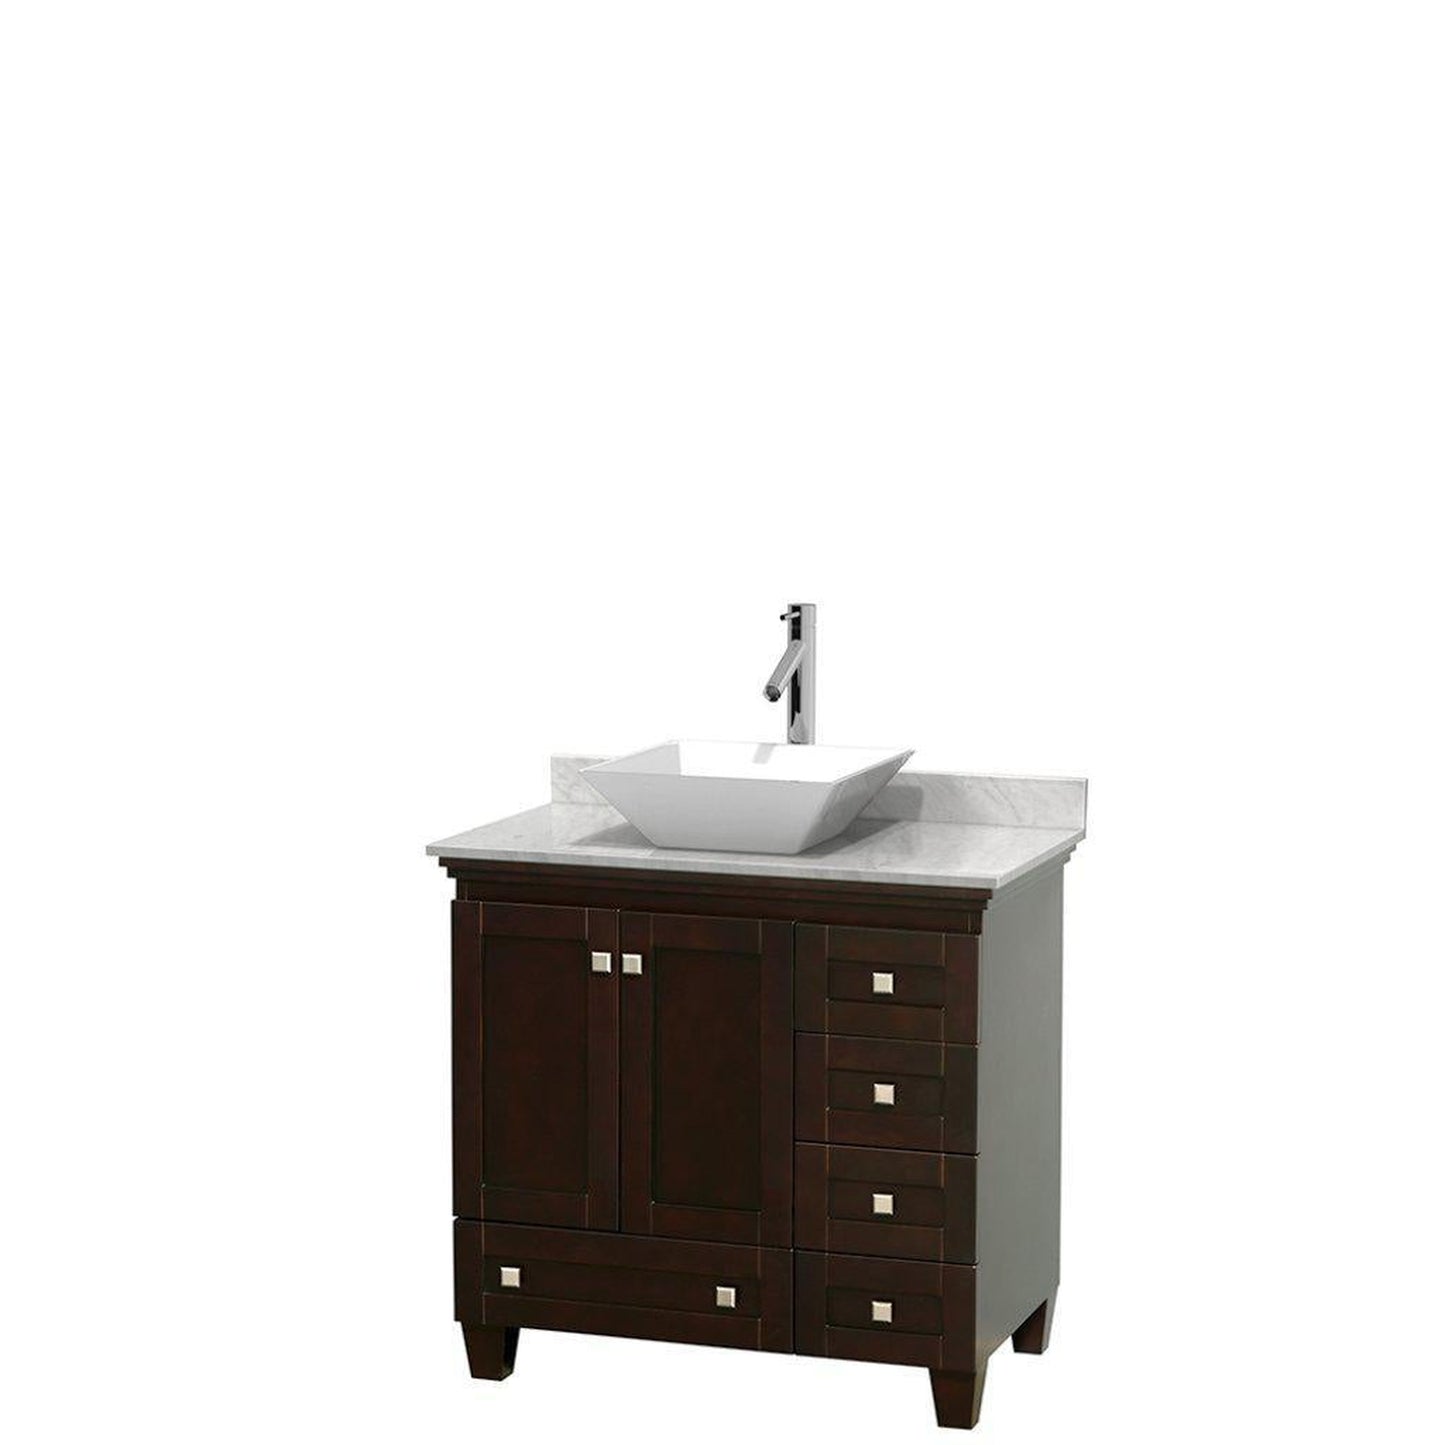 Wyndham Collection Acclaim 36" Single Bathroom Espresso Vanity With White Carrara Marble Countertop And Pyra White Porcelain Sink